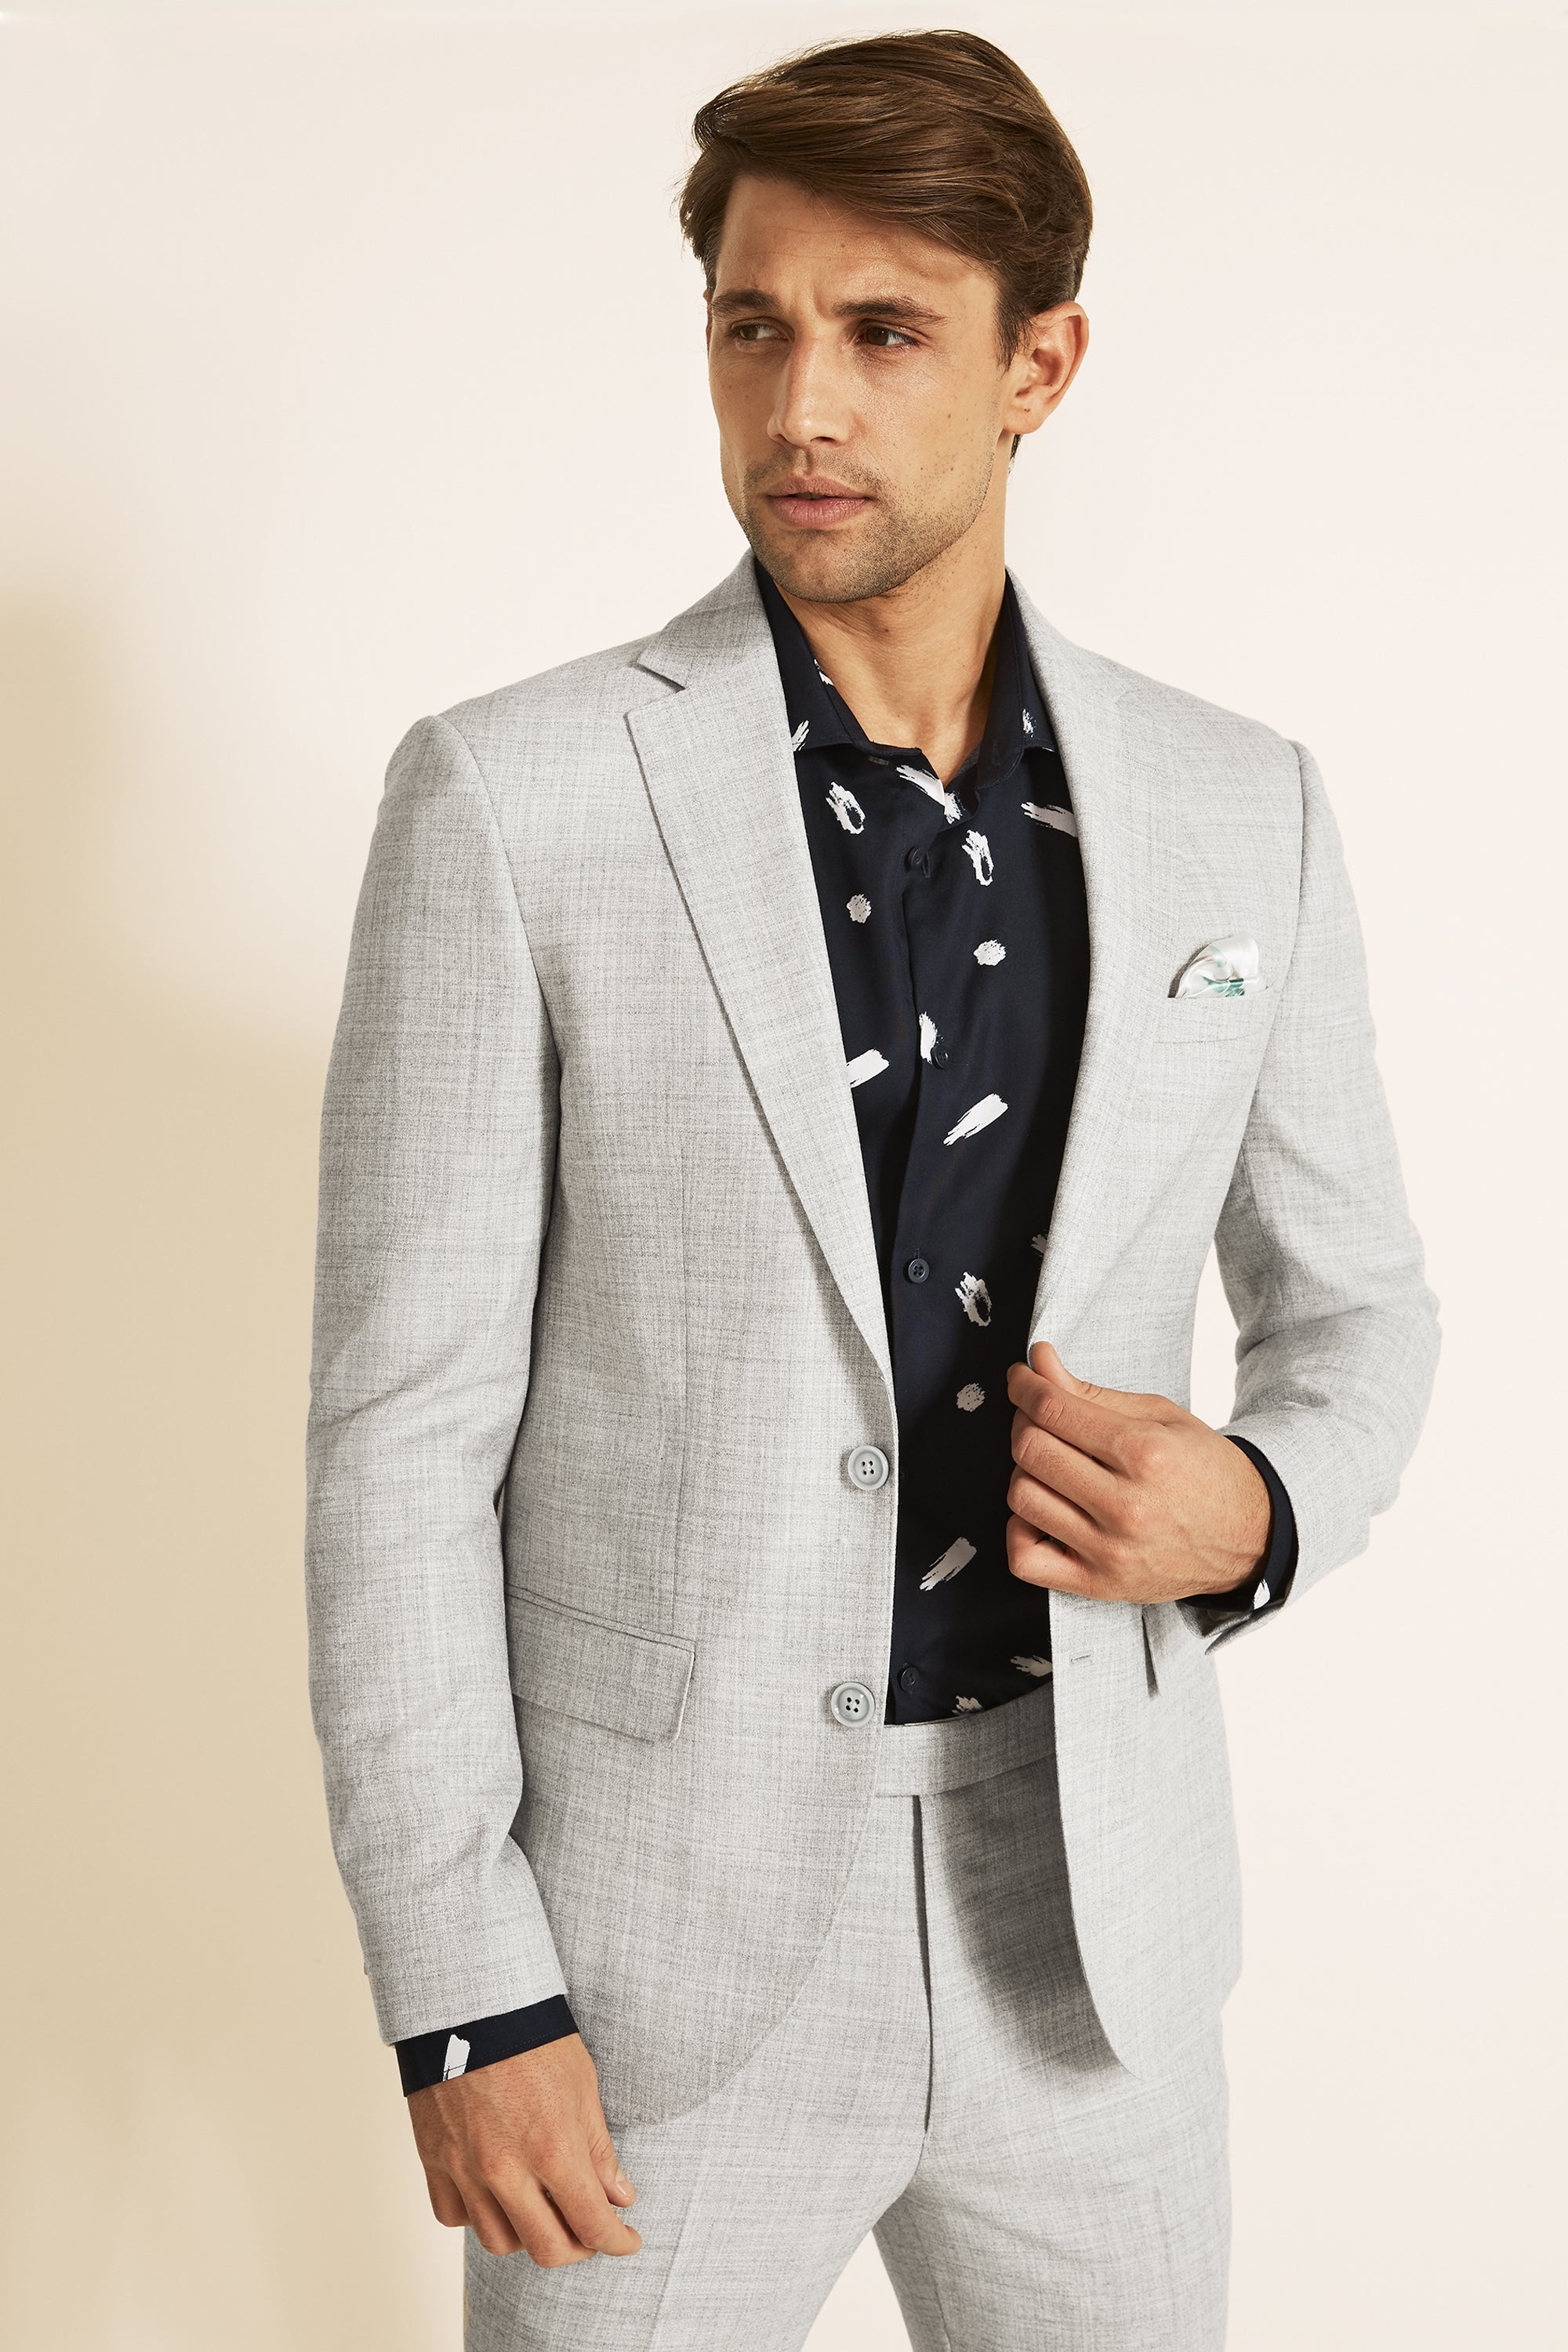 FRENCH CONNECTION | Slim Fit Light Grey Flannel Jacket | Moss Box